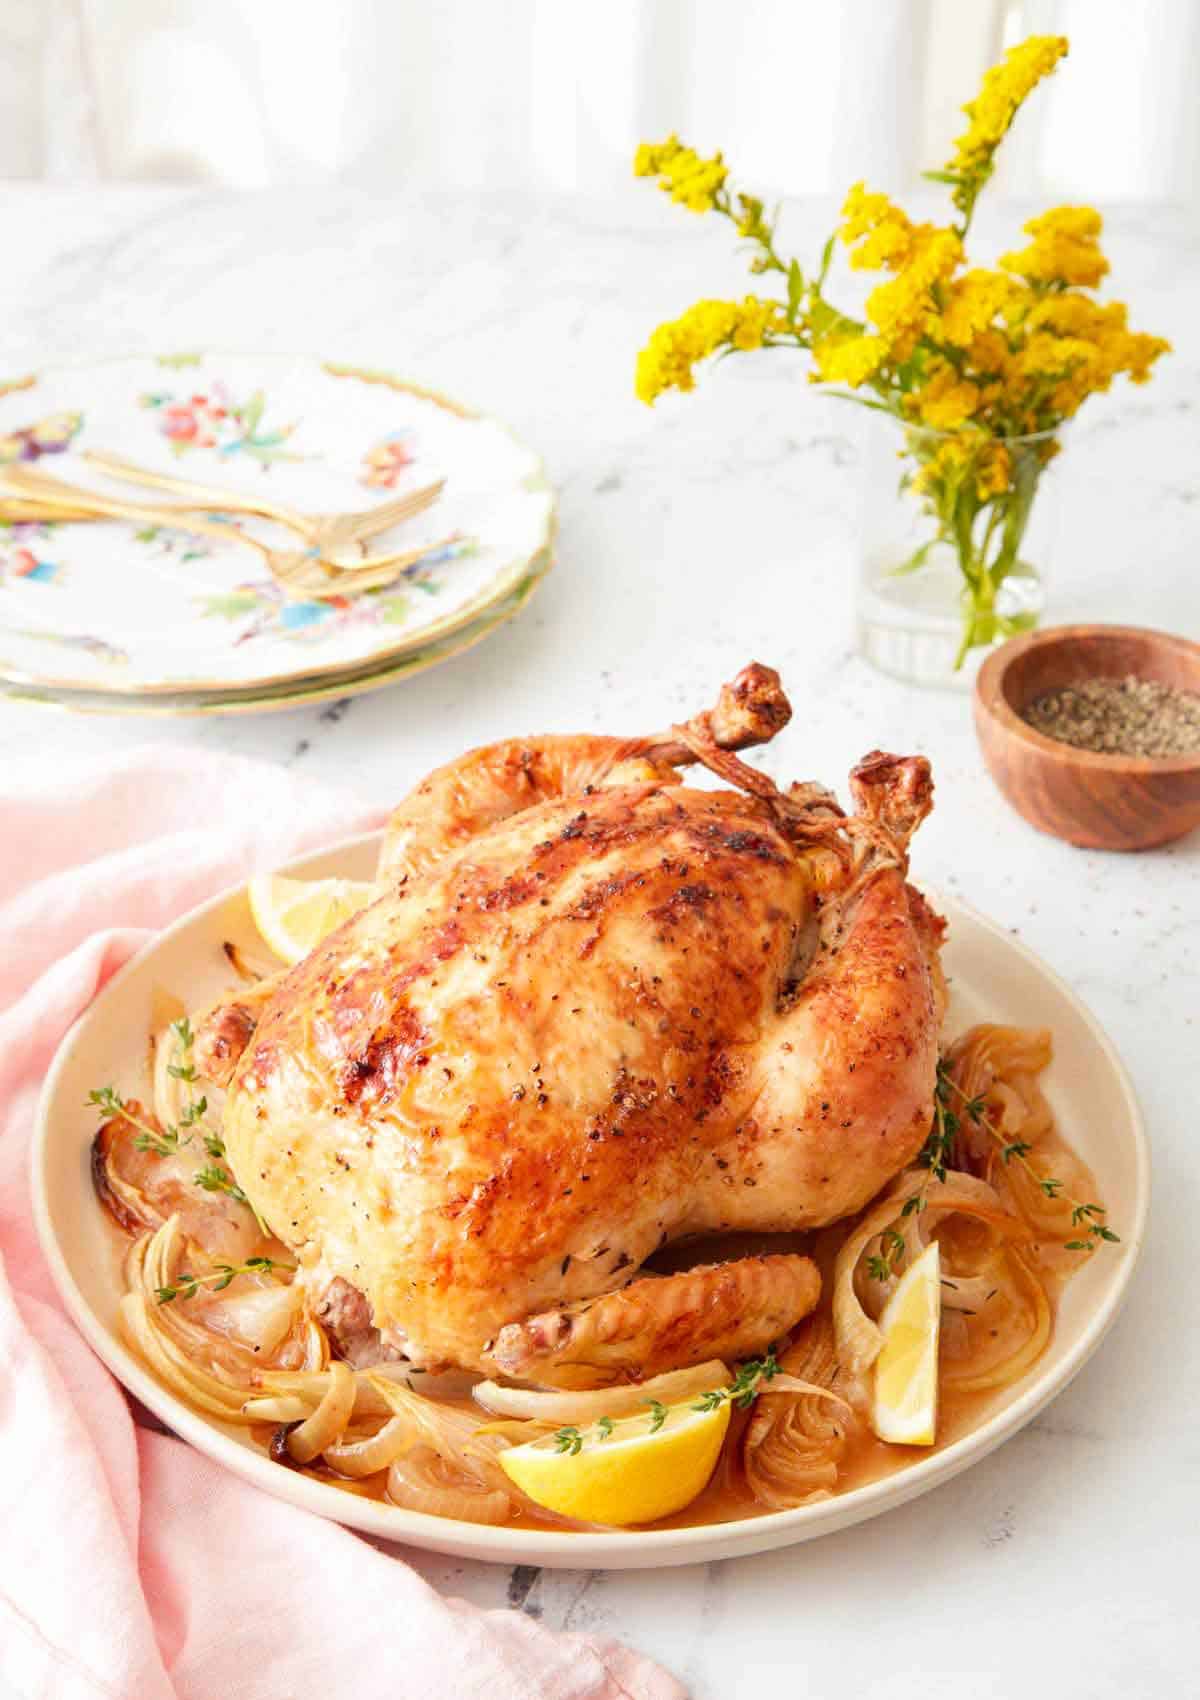 A roasted chicken on a plate of onions, lemon, and thyme. A small bunch of flowers, peppers, and plates in the background.